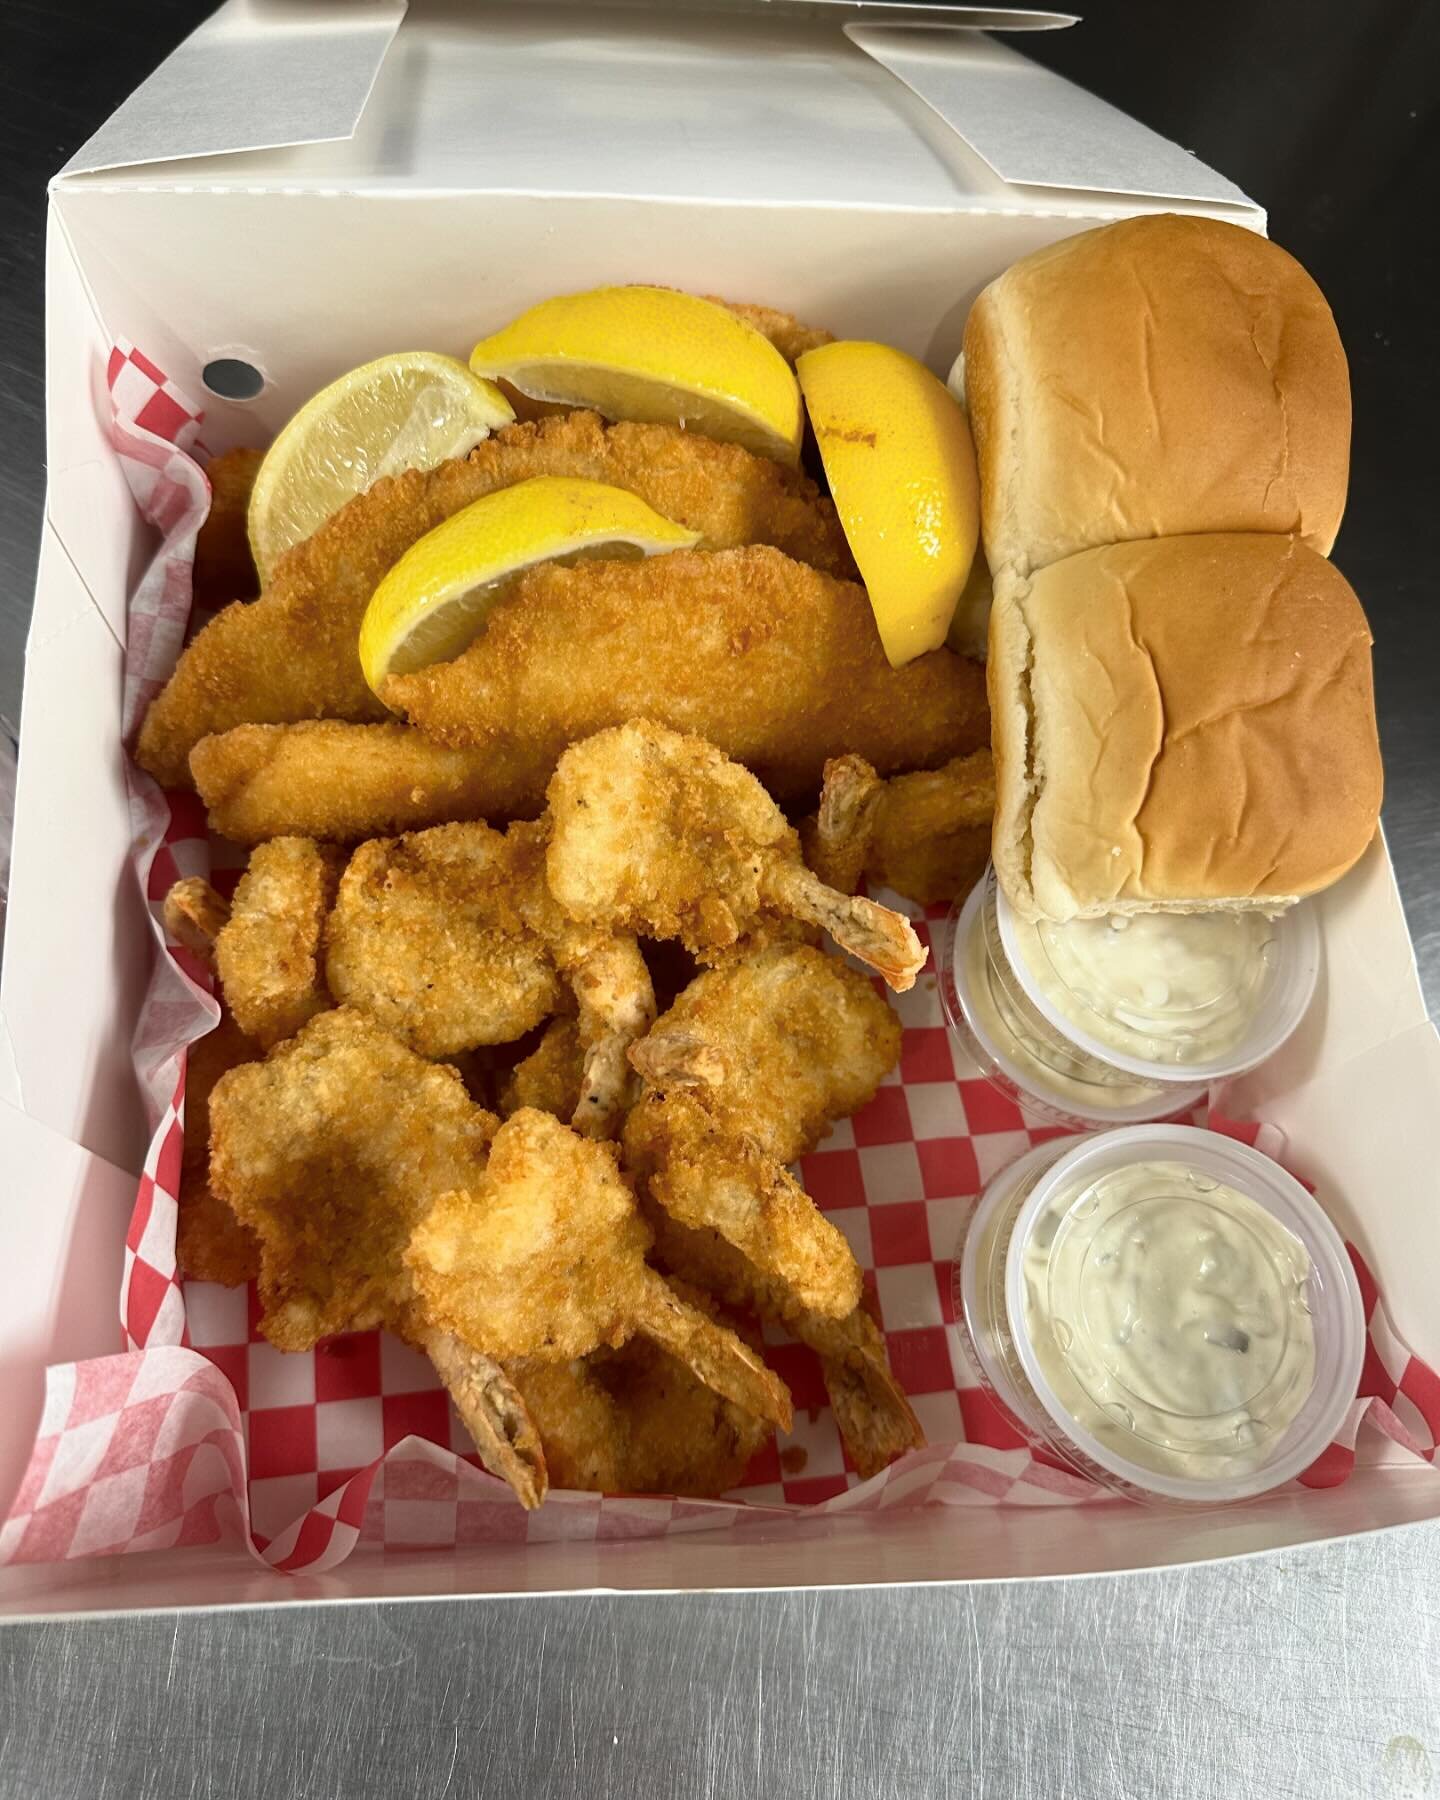 Family seafood box, 4 flounder filets, 12 hand breaded shrimp, 8 homemade tartar sauce, 4 rolls, lemon wedges and 2 family sides for $54.99! Come get one. #vicksfamoushamburgers #homeoftheultimateburger #fishfriday